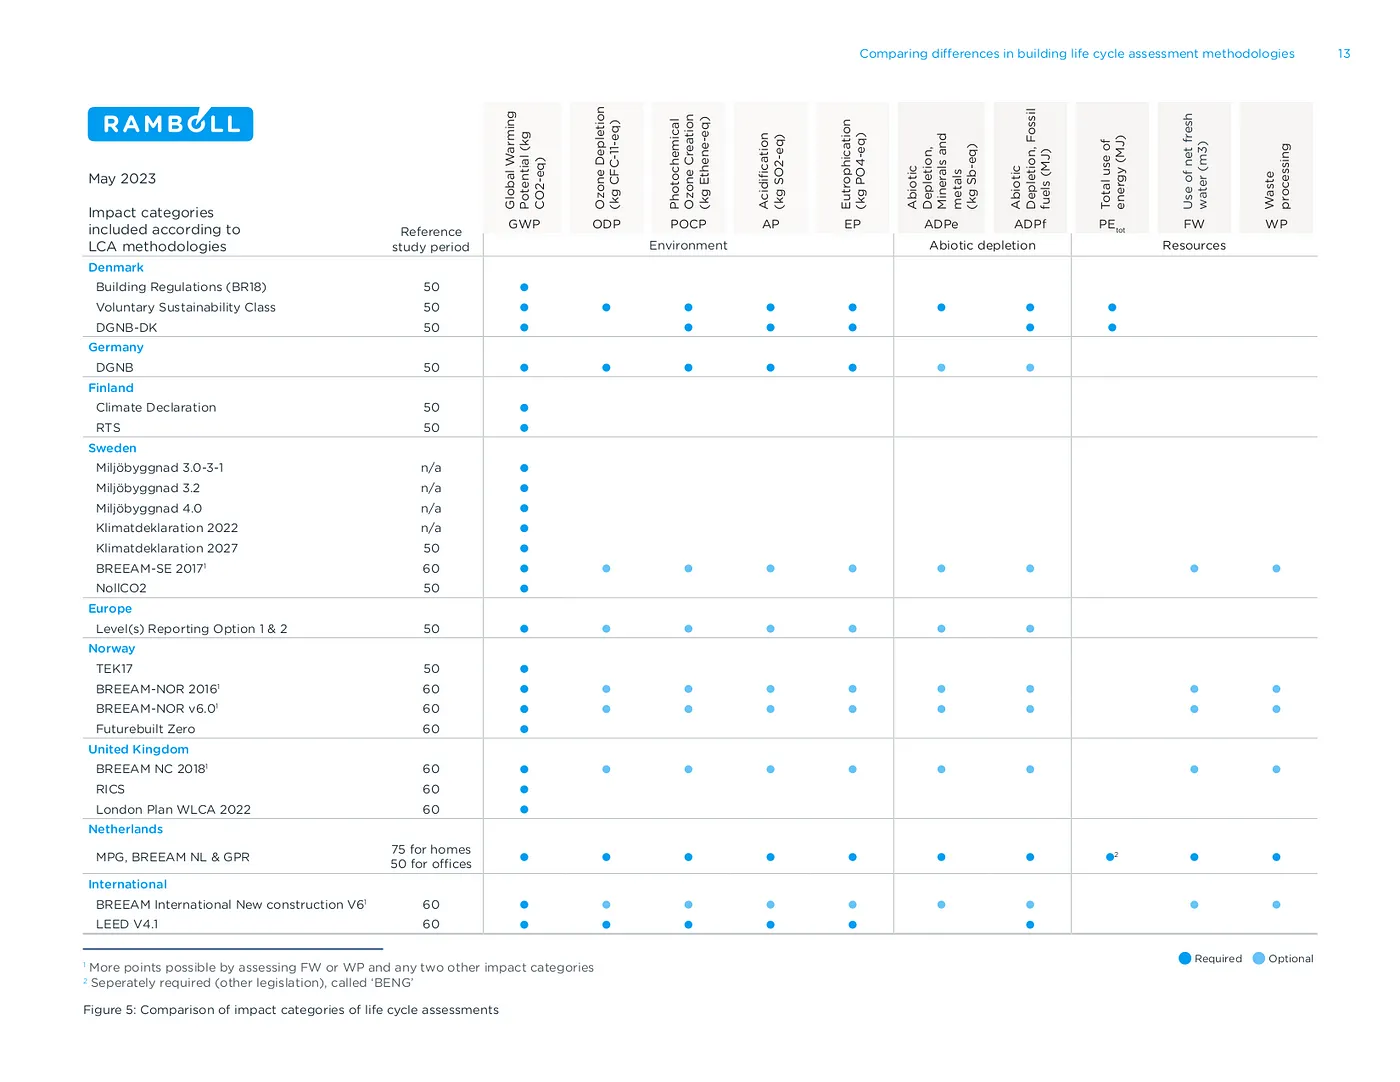 Comparative Analysis of LCA Impact Categories by Ramboll